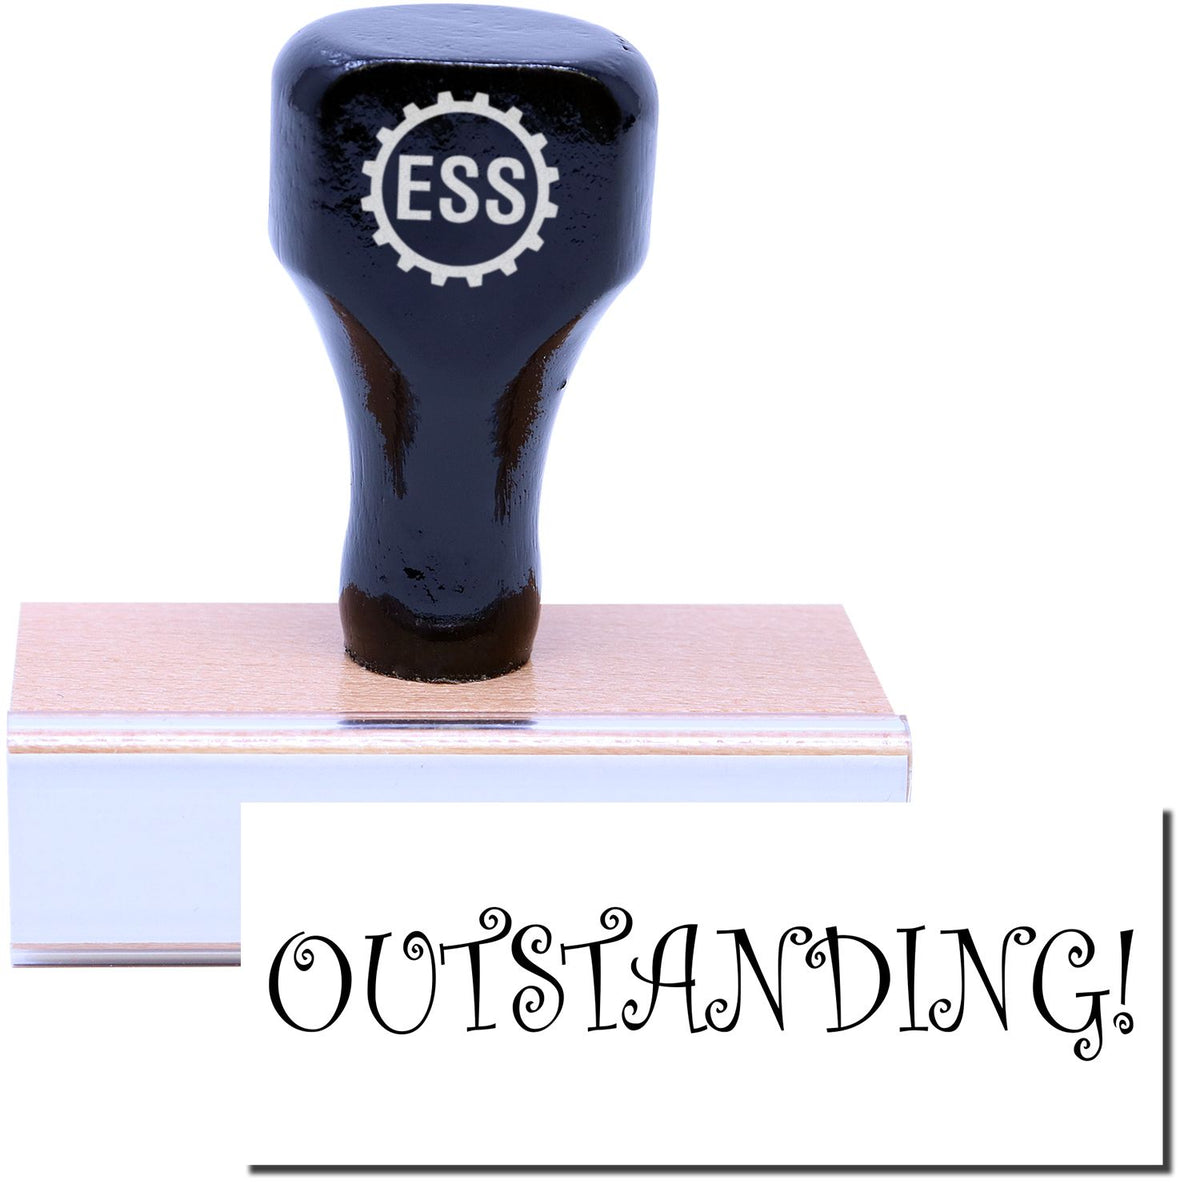 A stock office rubber stamp with a stamped image showing how the text &quot;OUTSTANDING!&quot; in a large font is displayed after stamping.